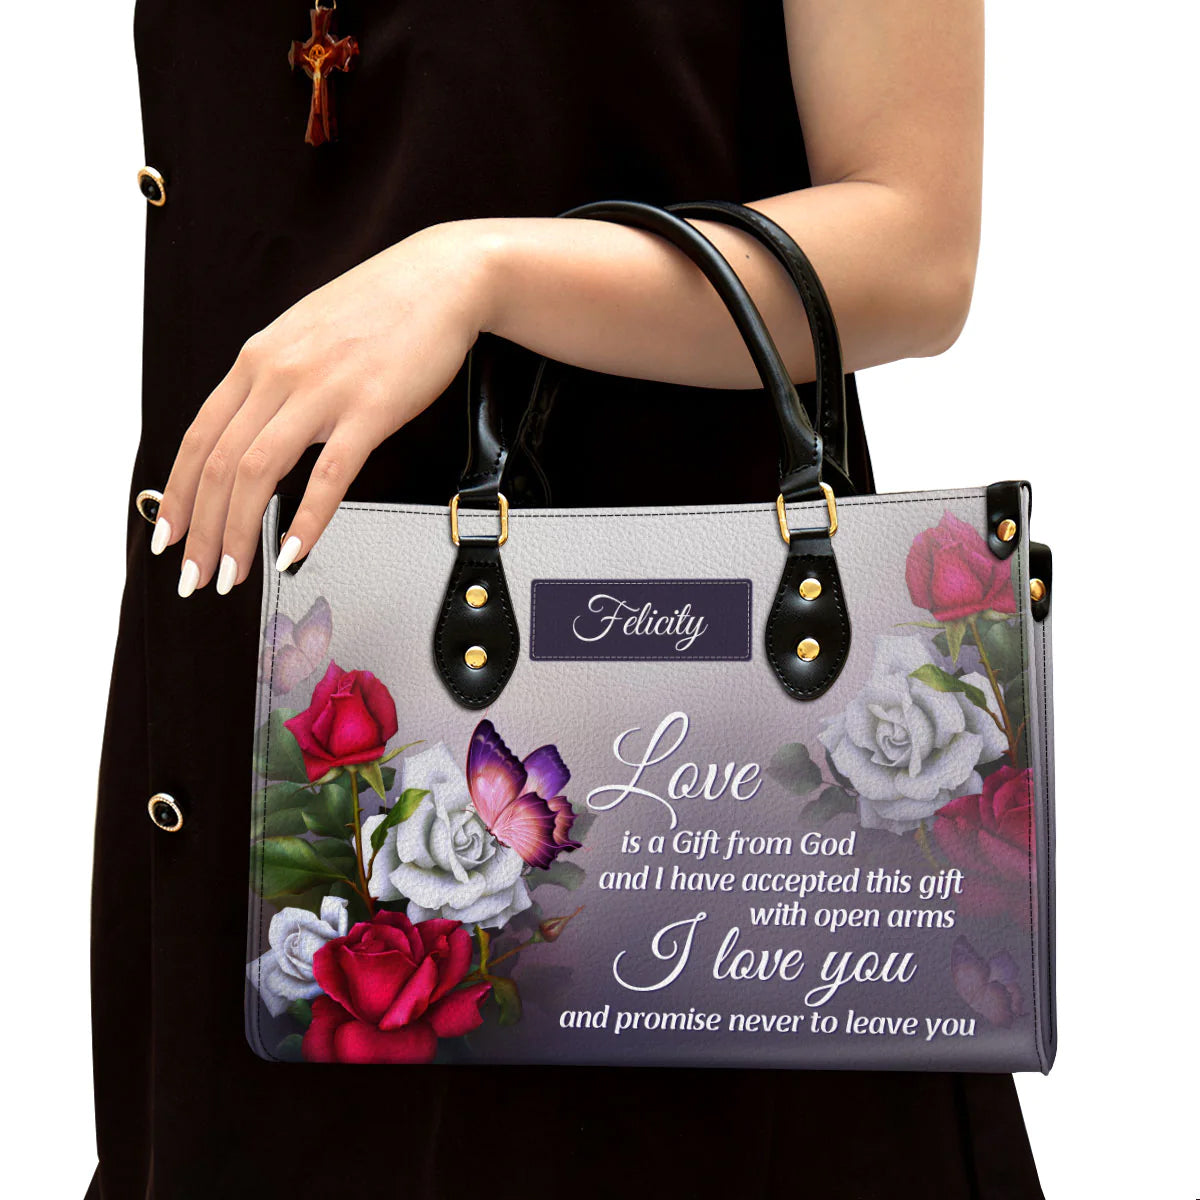 Christianart Handbag, Love Is A Gift From God, Personalized Gifts, Gifts for Women, Christmas Gift. - Christian Art Bag